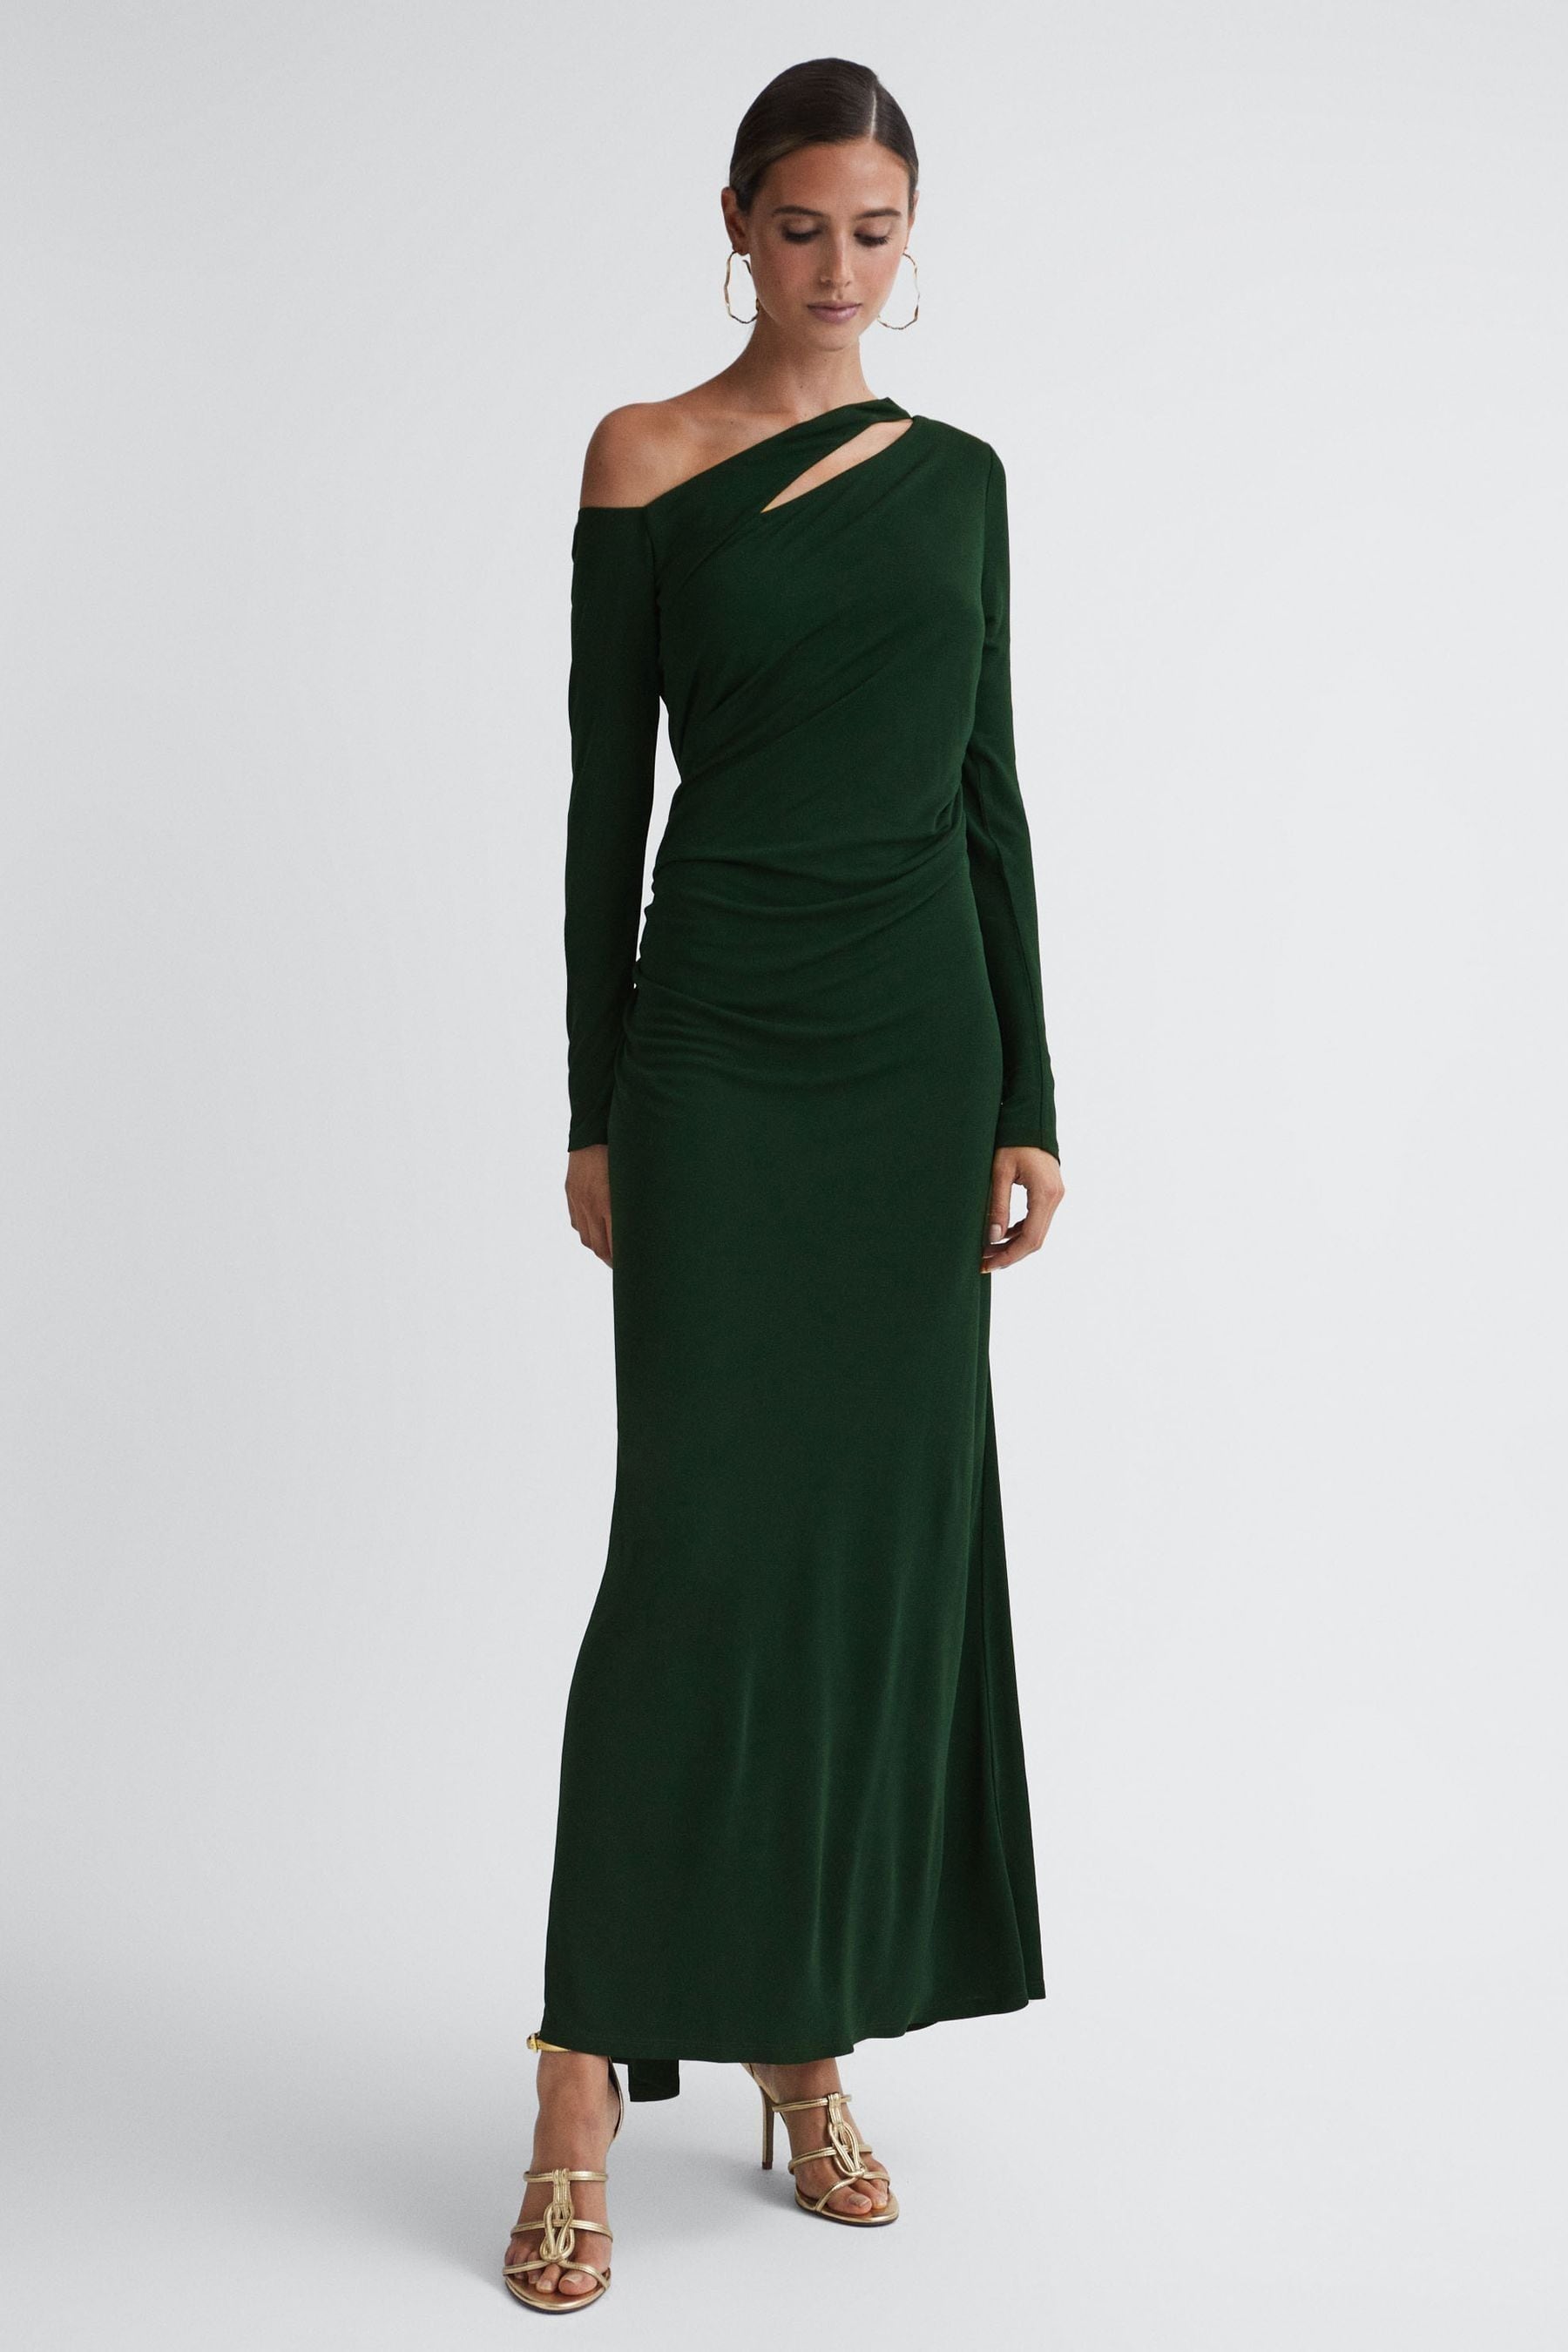 Reiss Delphine - Green Off-the-shoulder Cut-out Maxi Dress, Us 8